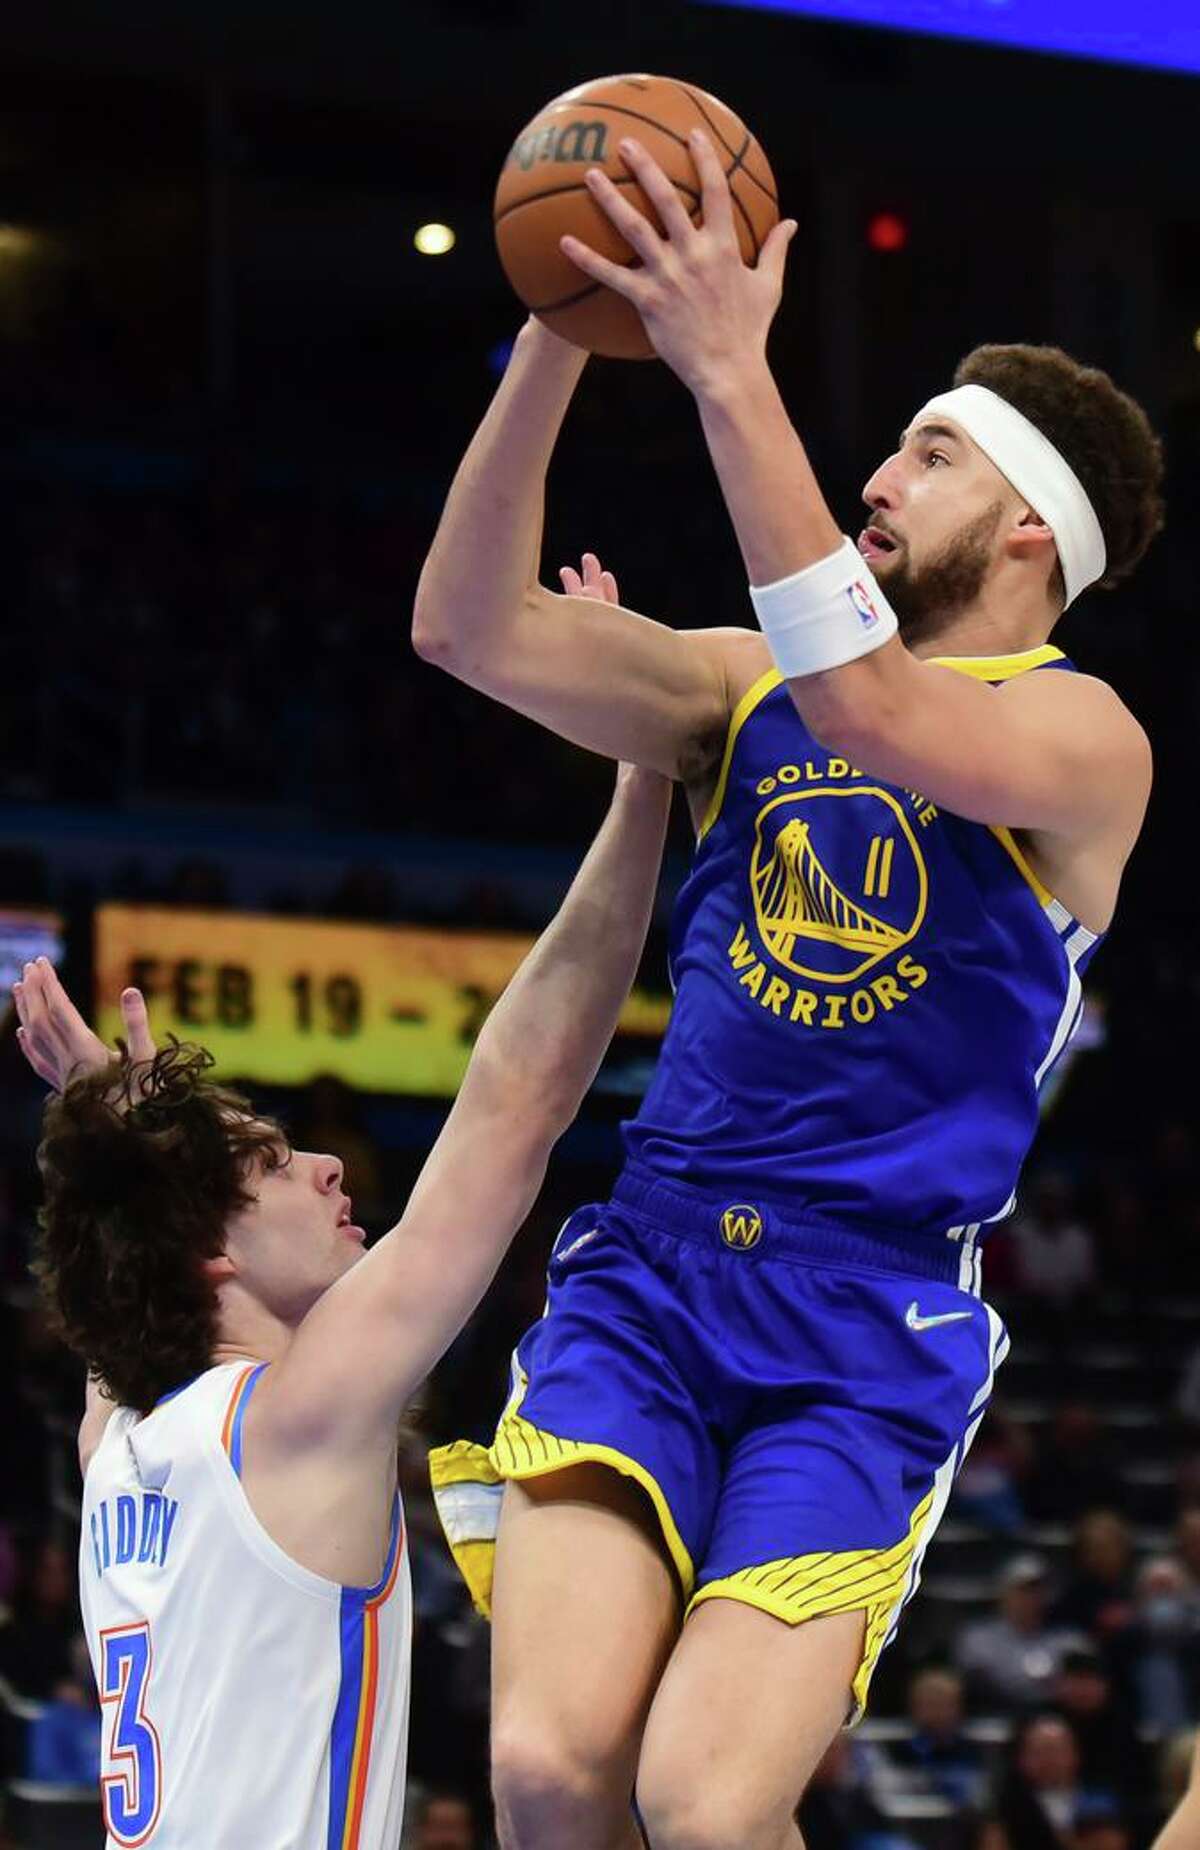 Golden State Warriors guard Klay Thompson (11) shoots over Oklahoma City Thunder guard Josh Giddey (3) in the first half of an NBA basketball game, Monday, Feb. 7, 2022, in Oklahoma City. (AP Photo/Kyle Phillips)